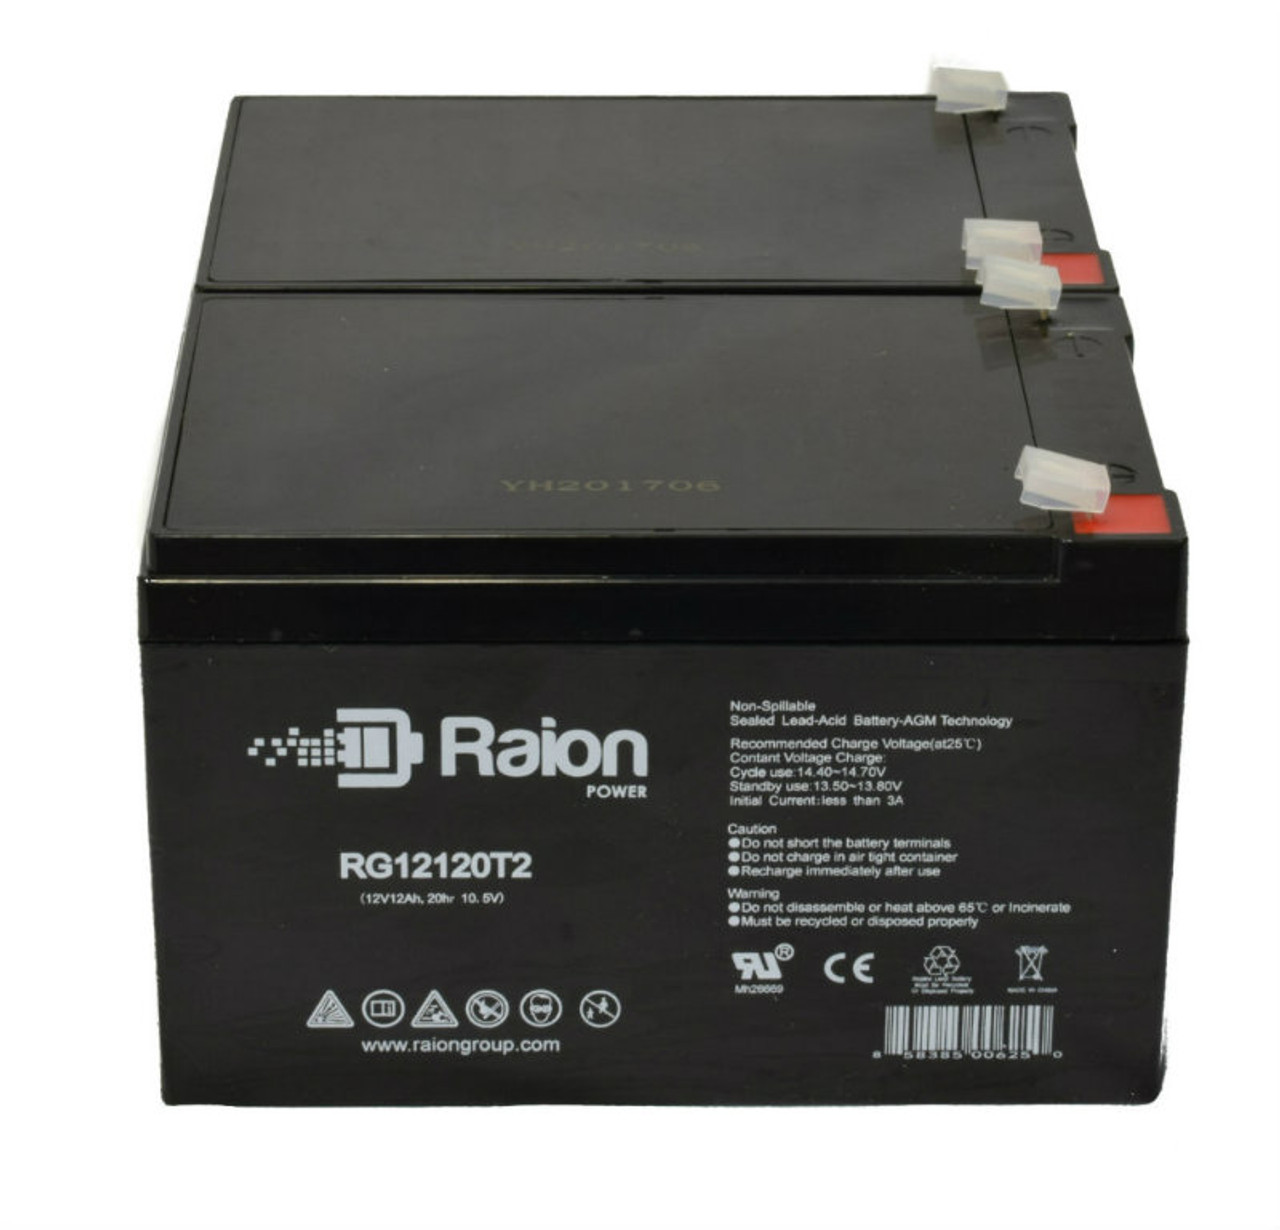 Raion Power 12V 12Ah Replacement Alarm Security System Battery for Altronix SMP16PMC12X - 2 Pack